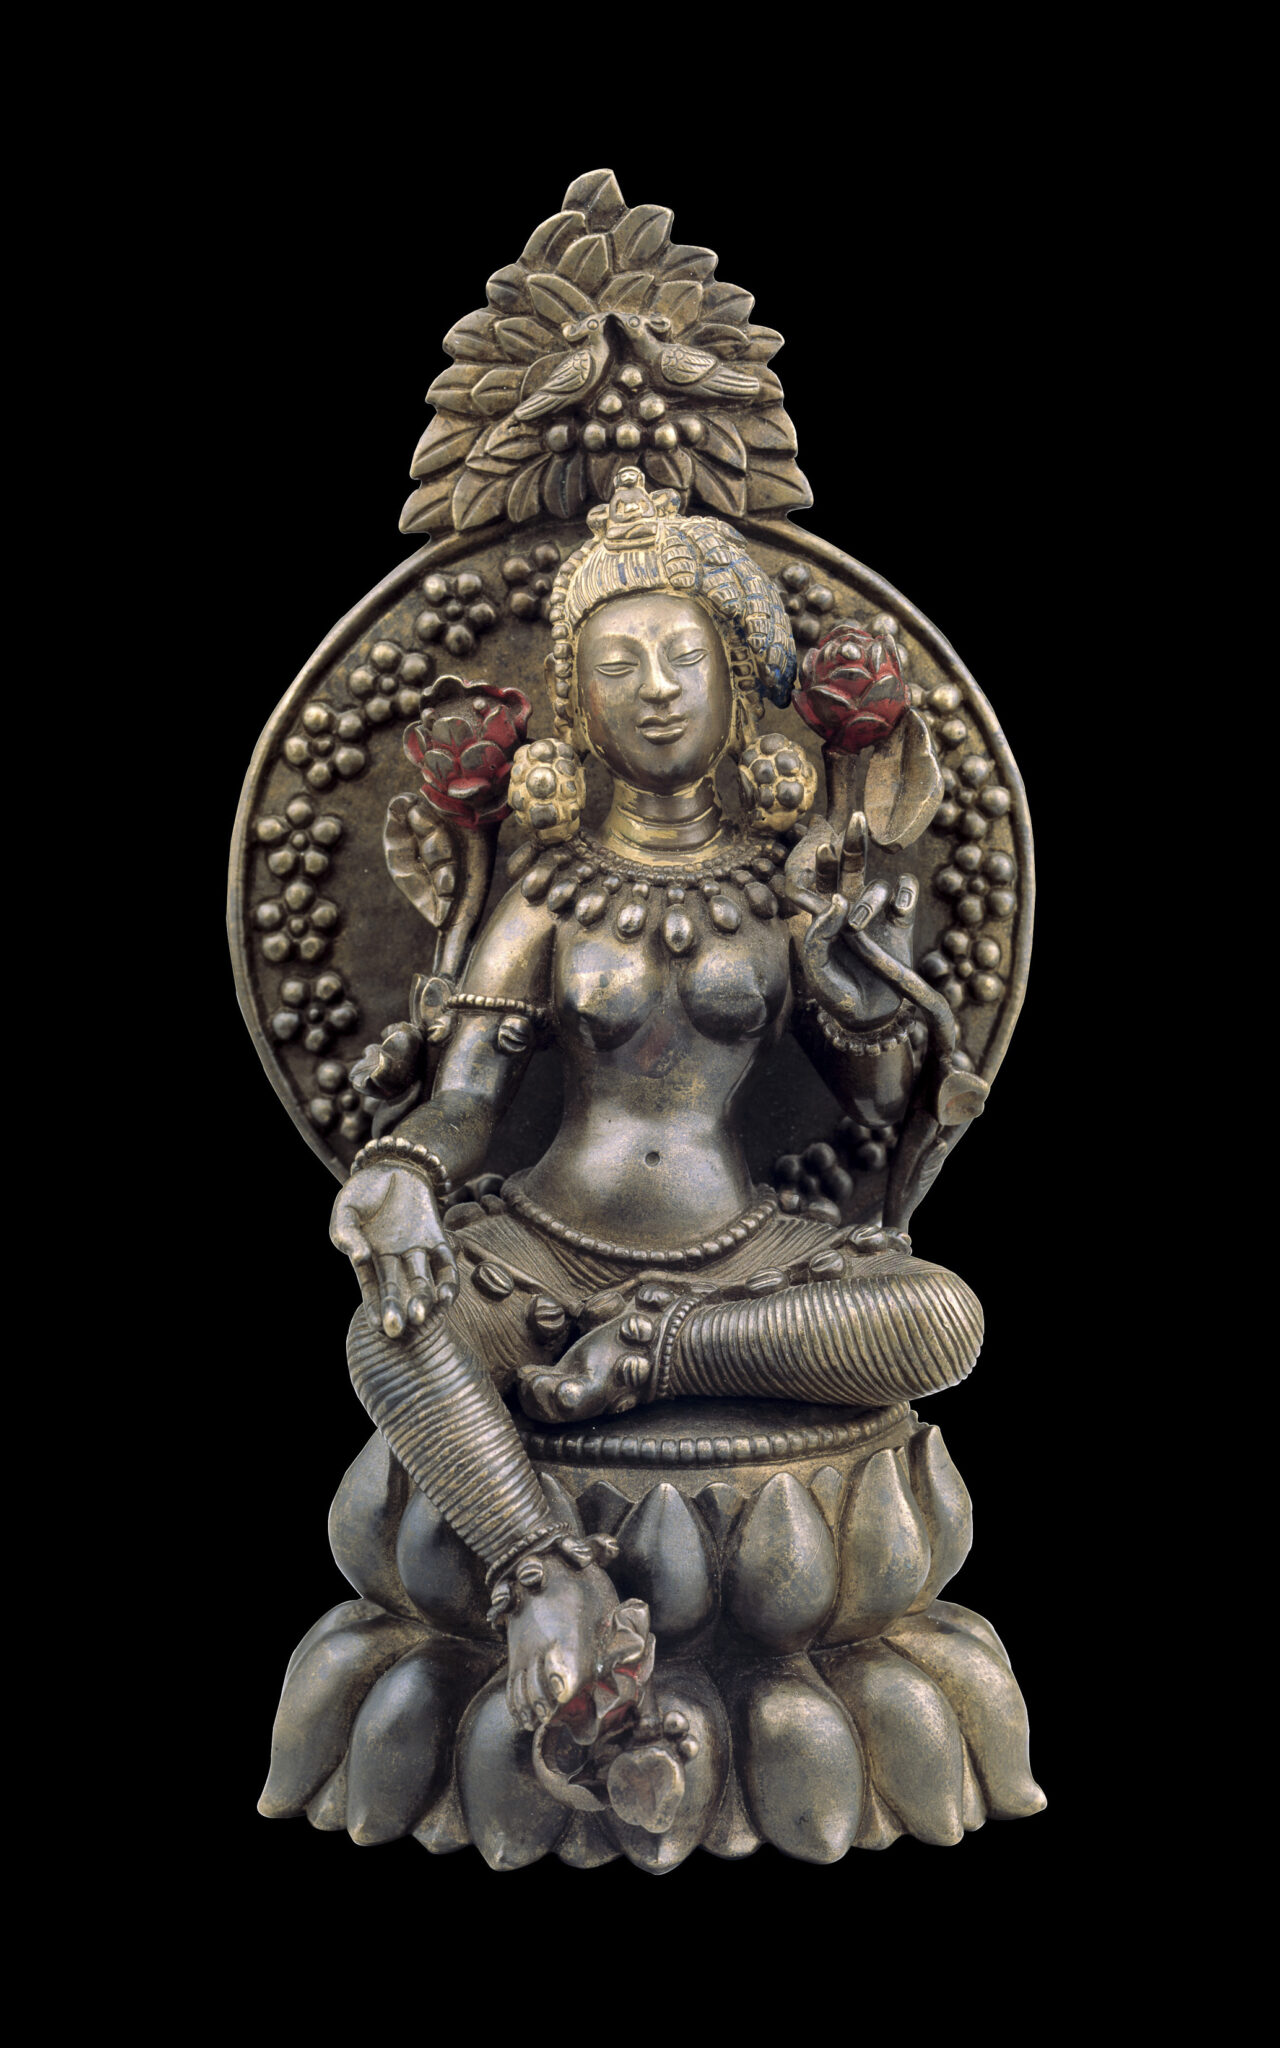 Silver- and brass-colored sculpture depicting bodhisattva, holding red blossoms, seated with left foot extended